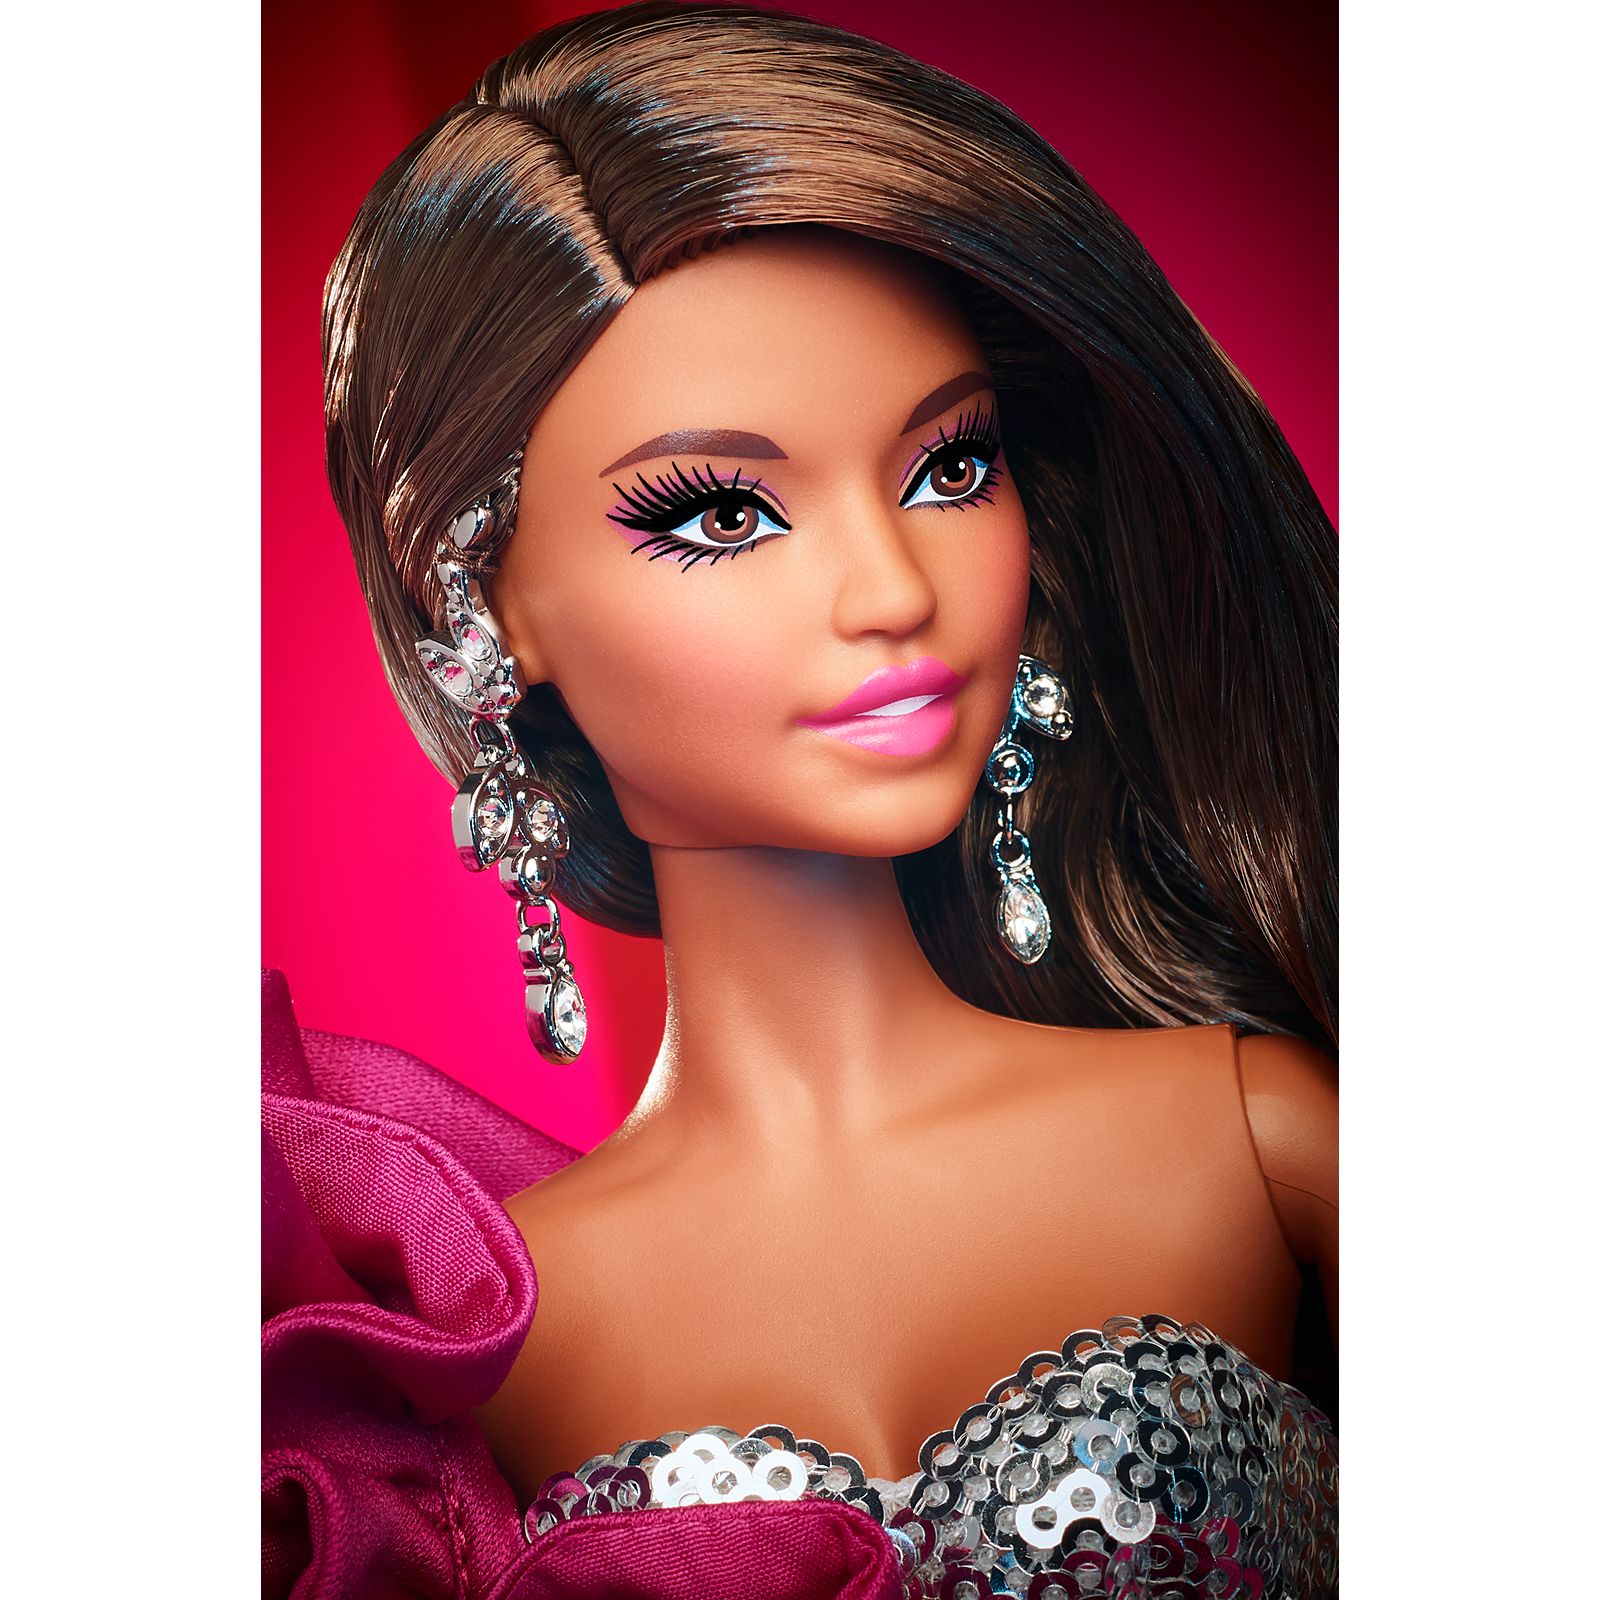 Barbie Signature Pink Collection Doll, Silkstone Barbie Doll in